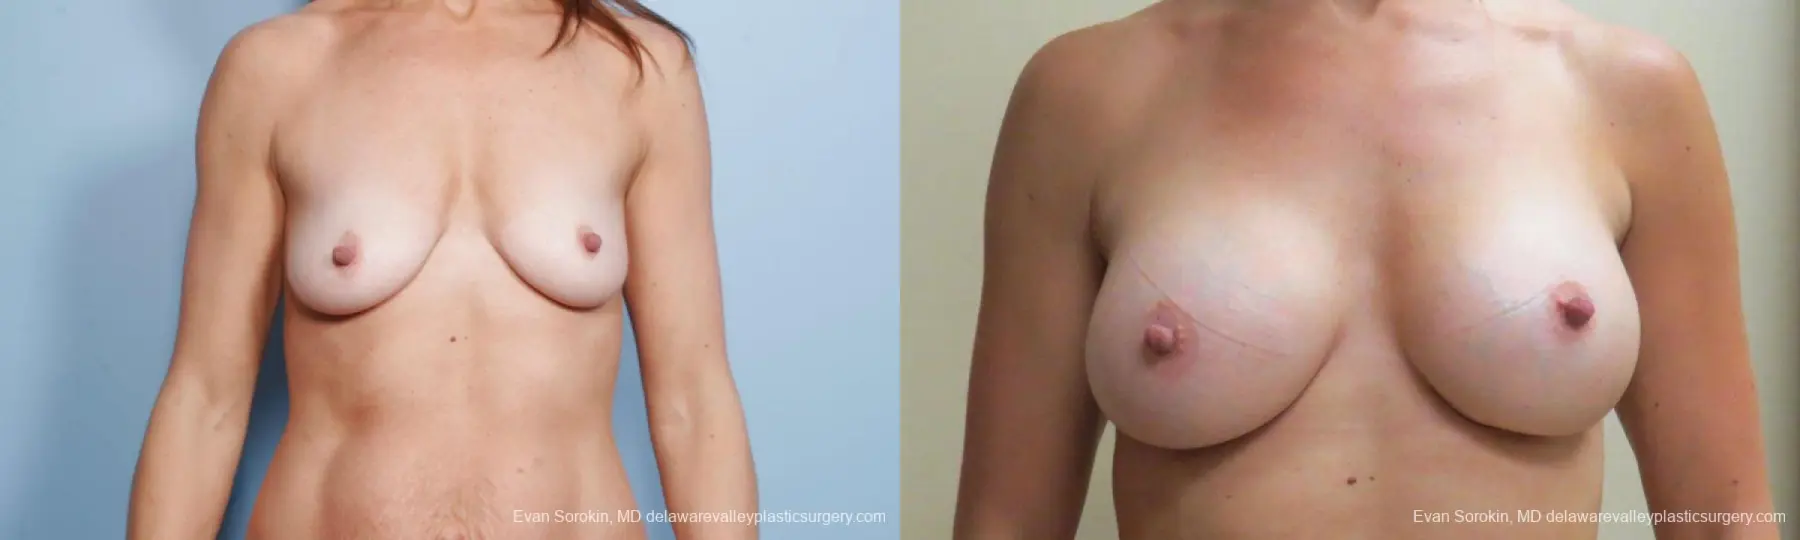 Philadelphia Breast Augmentation 9174 - Before and After 1